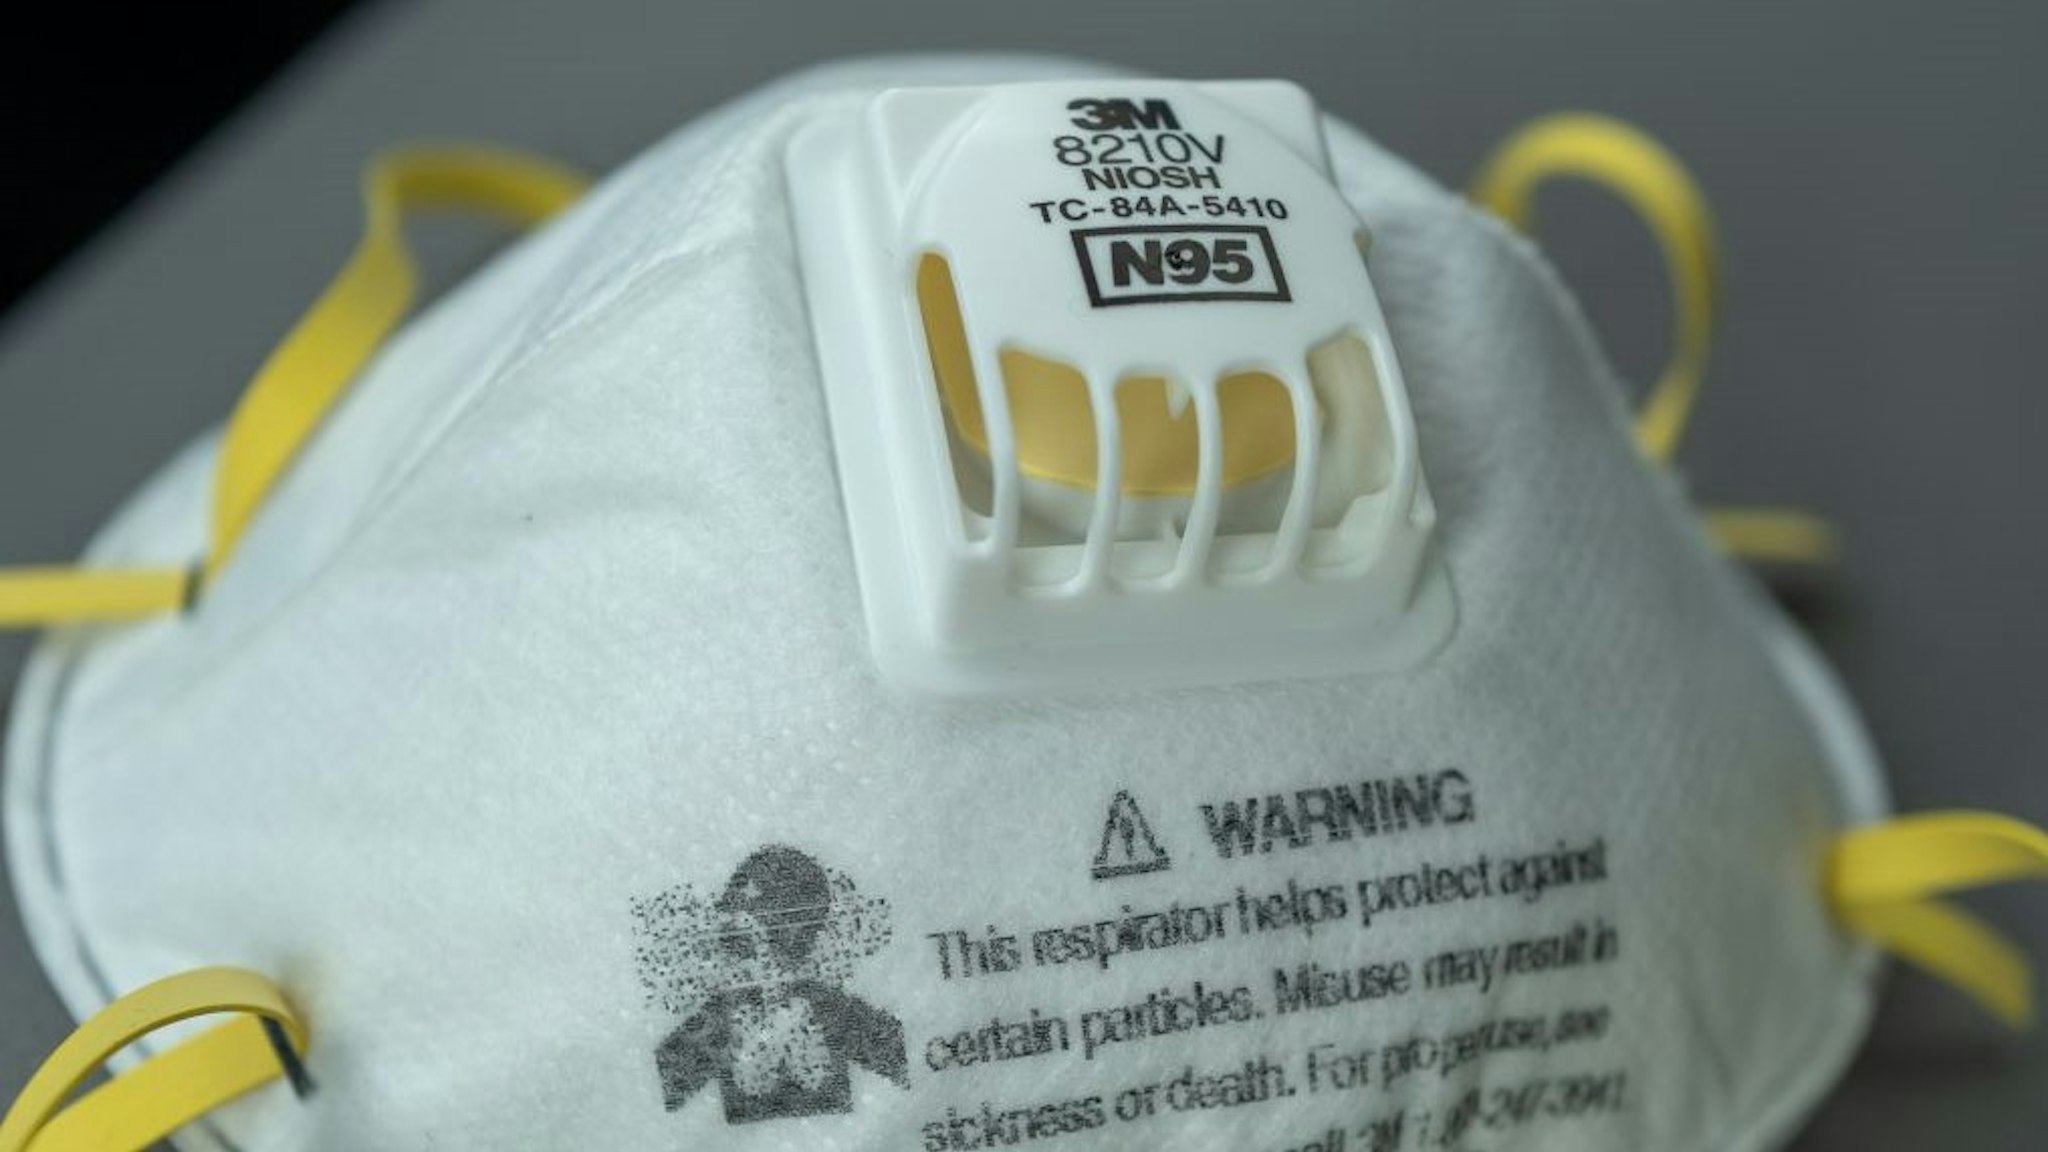 Close-up of N95 respirator mask during an outbreak of COVID-19 coronavirus, San Francisco, California, March 30, 2020. (Photo by